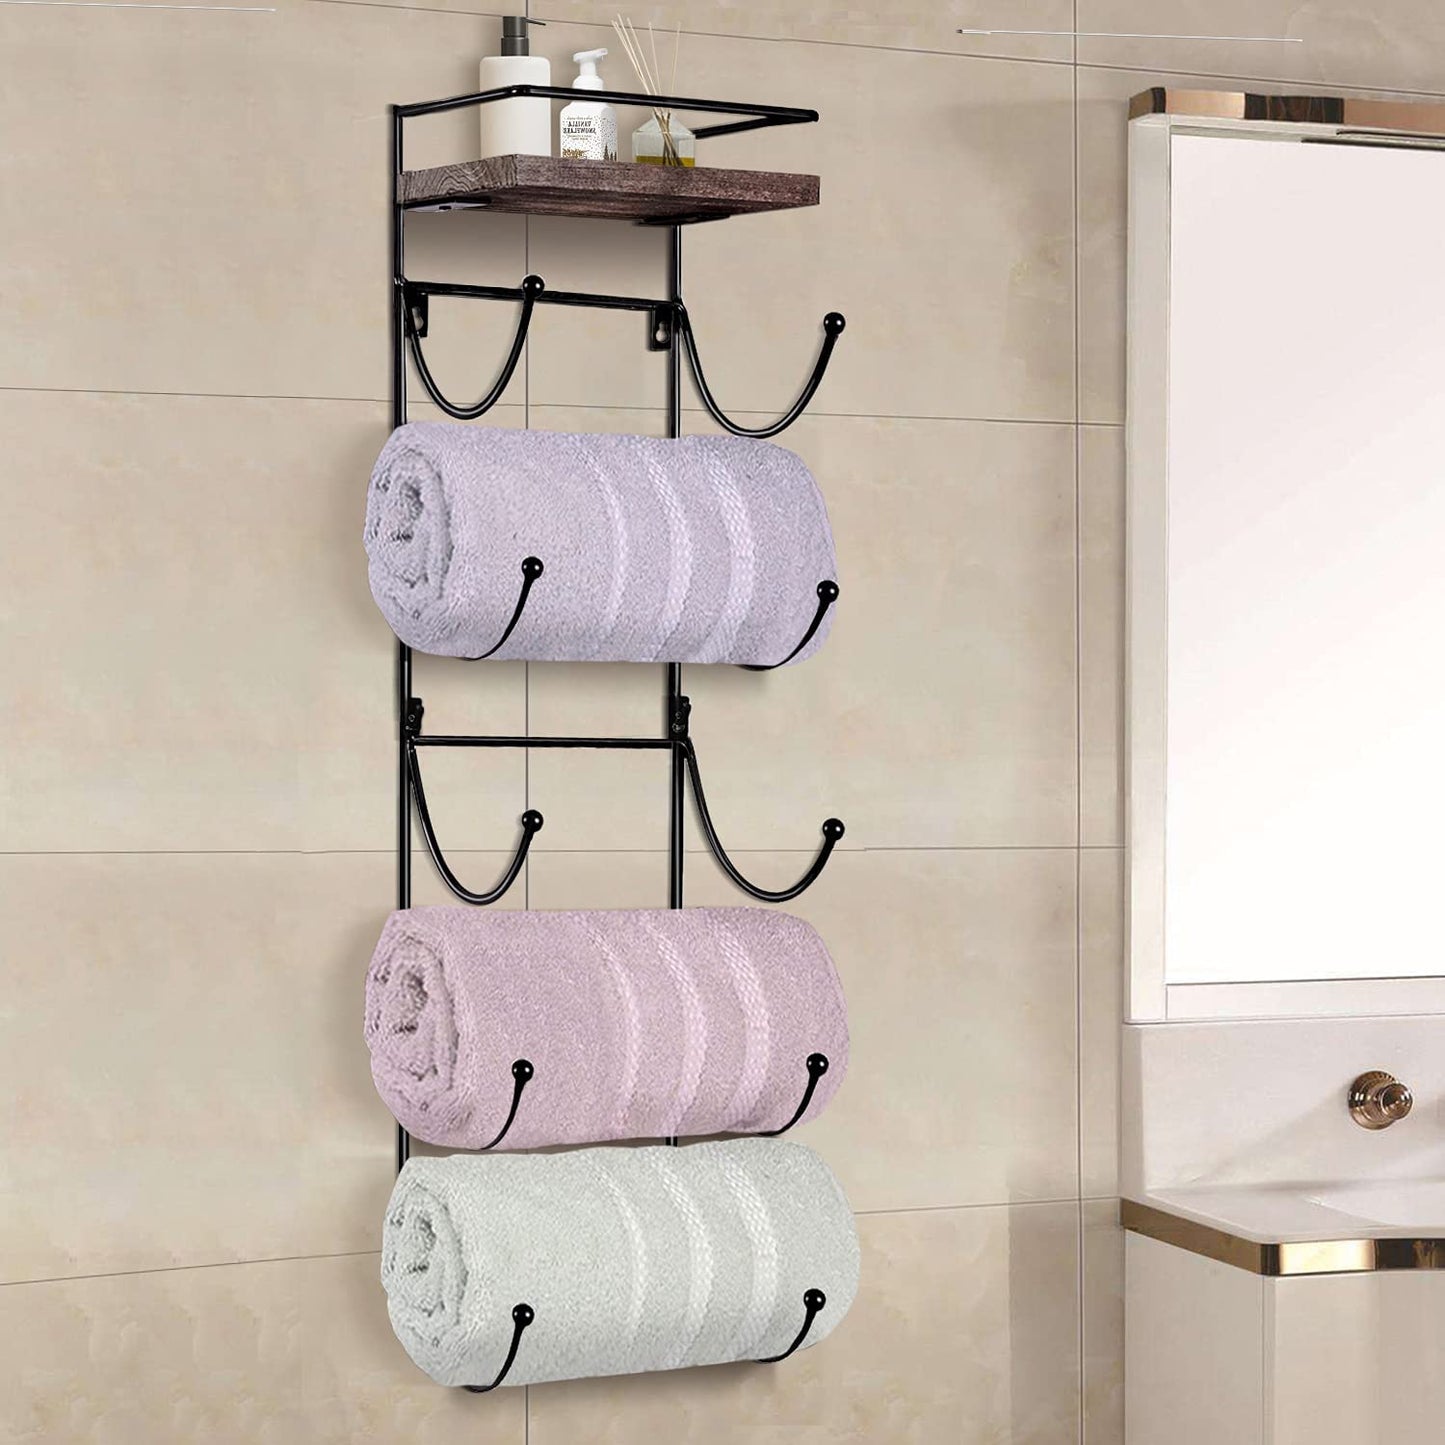 Towel Rack Wall Mounted with Top Shelf,Towel/Wine Rack Holder Organizer with 5 Compartments and Top Wooden Shelf for Bathroom Storage Bath Towels, 30.7" L x 7" W